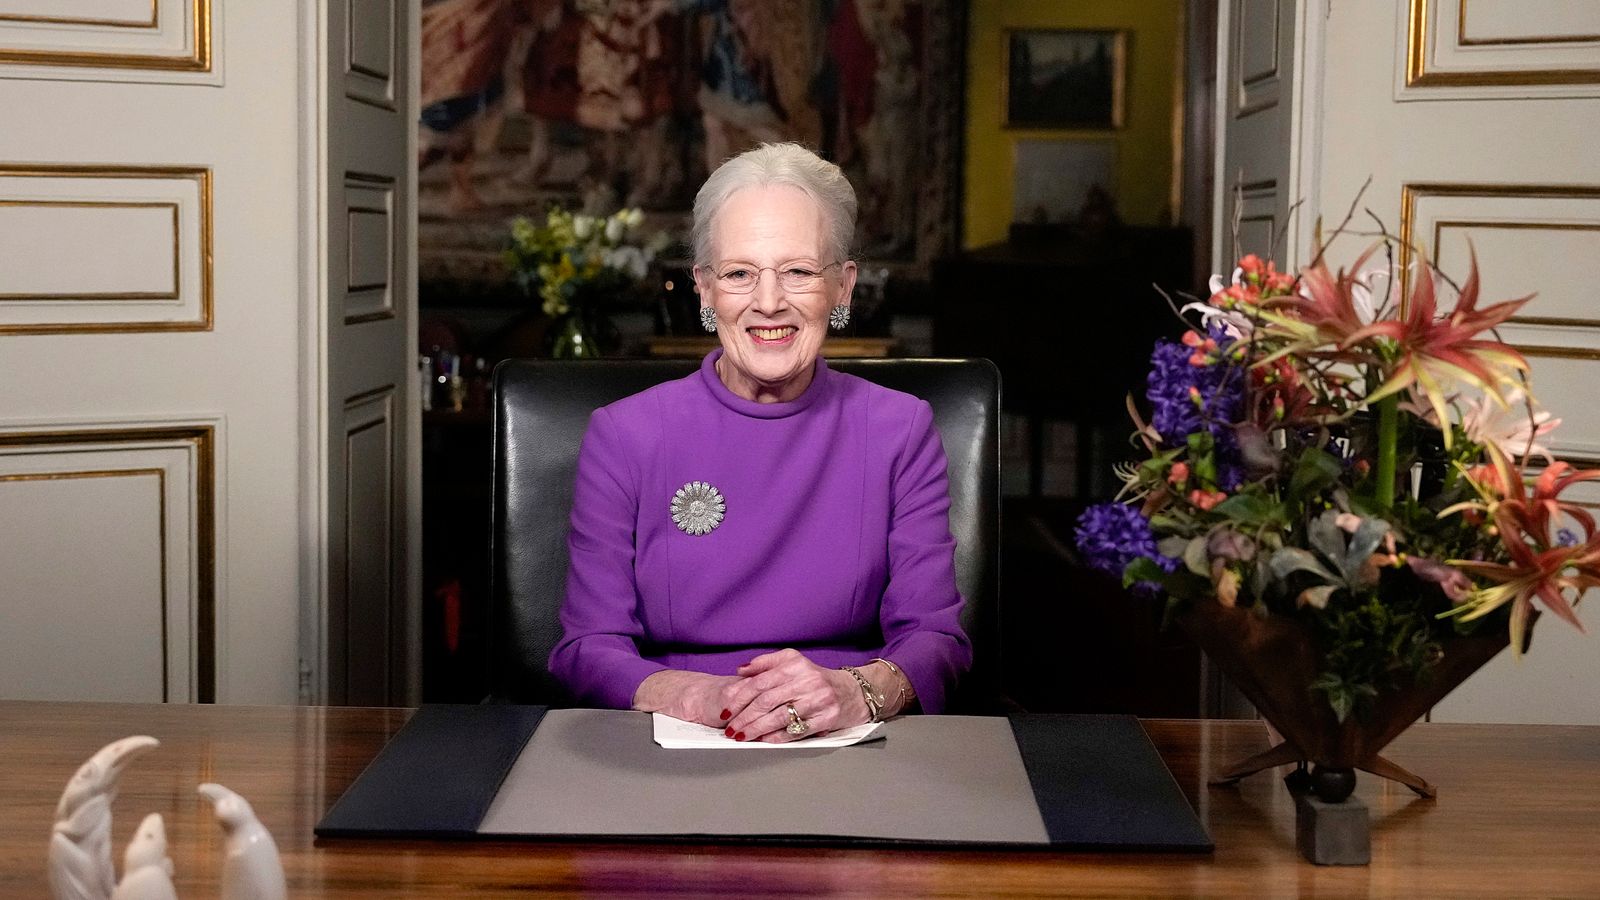 Denmark's queen Margrethe II unexpectedly announces abdication in New Year's Eve speech